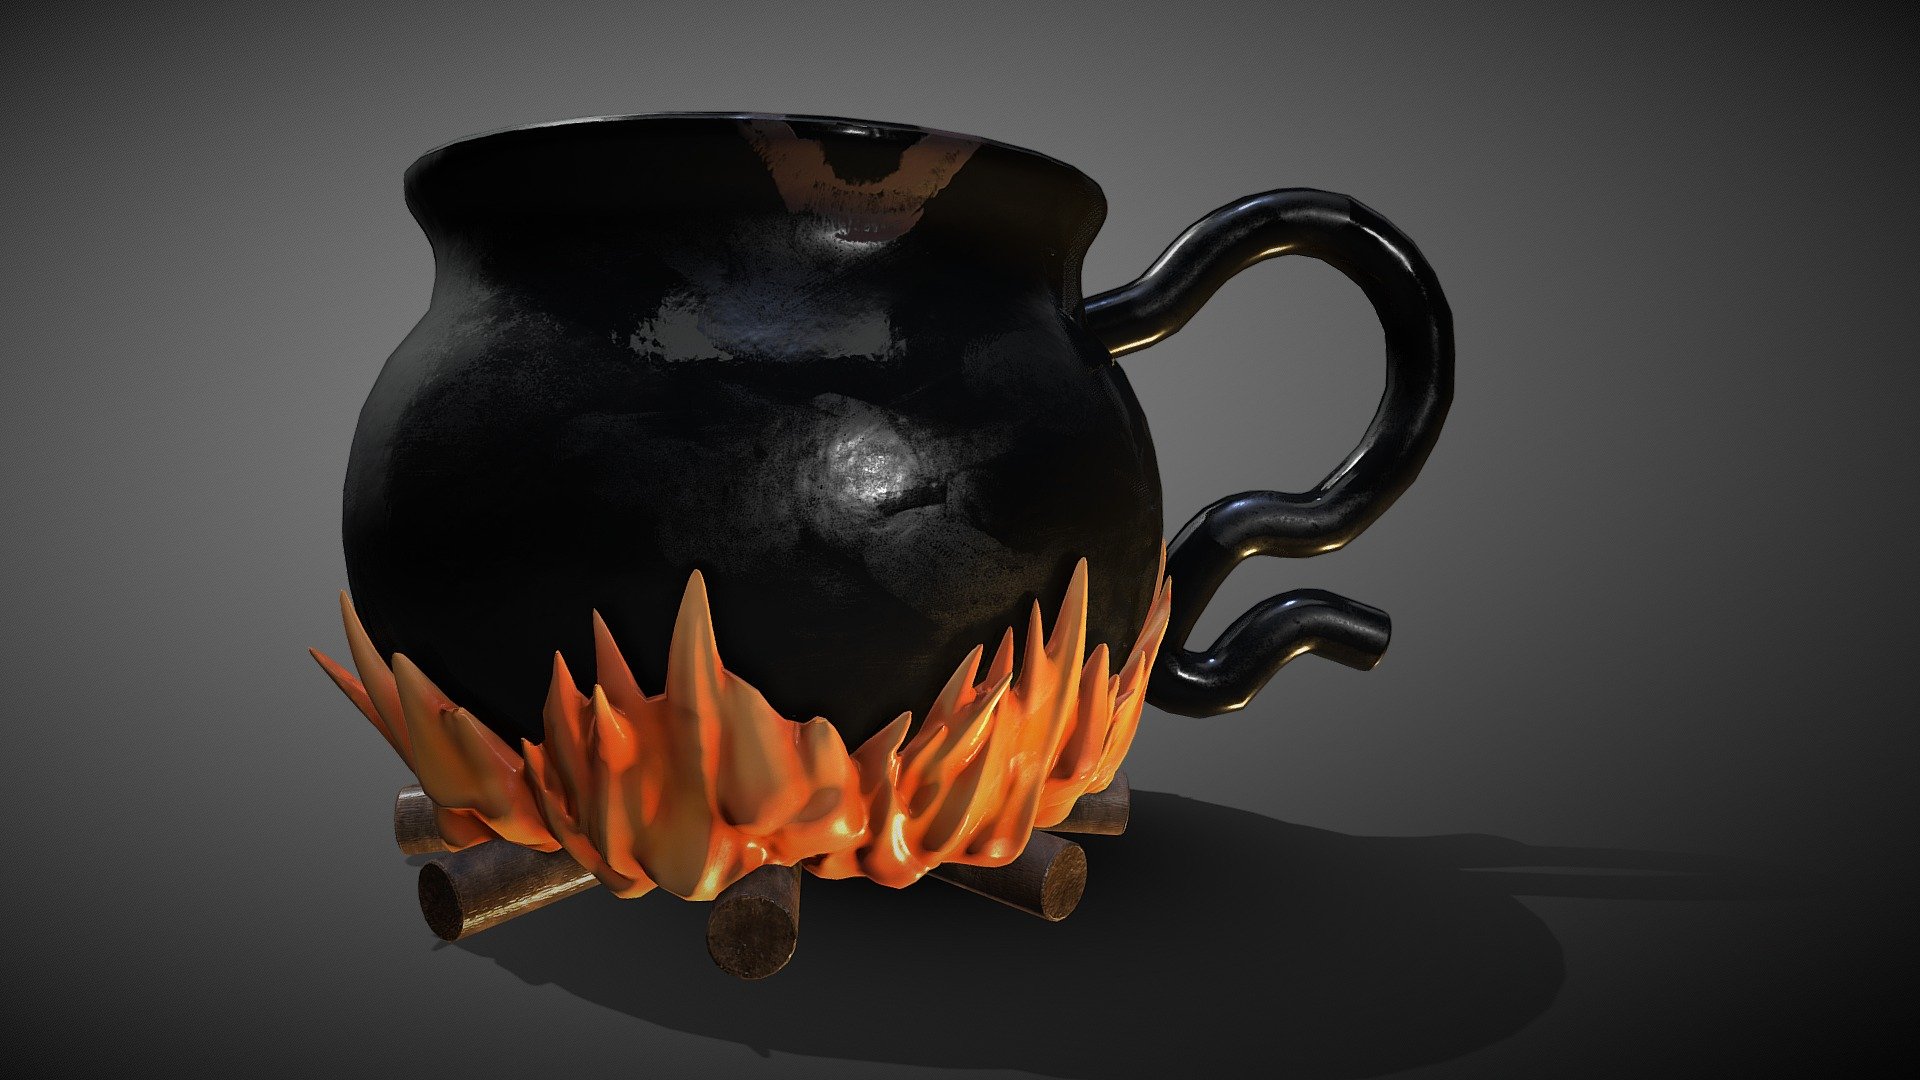 Decided to try something different. First attempt at making digital pottery 3d model